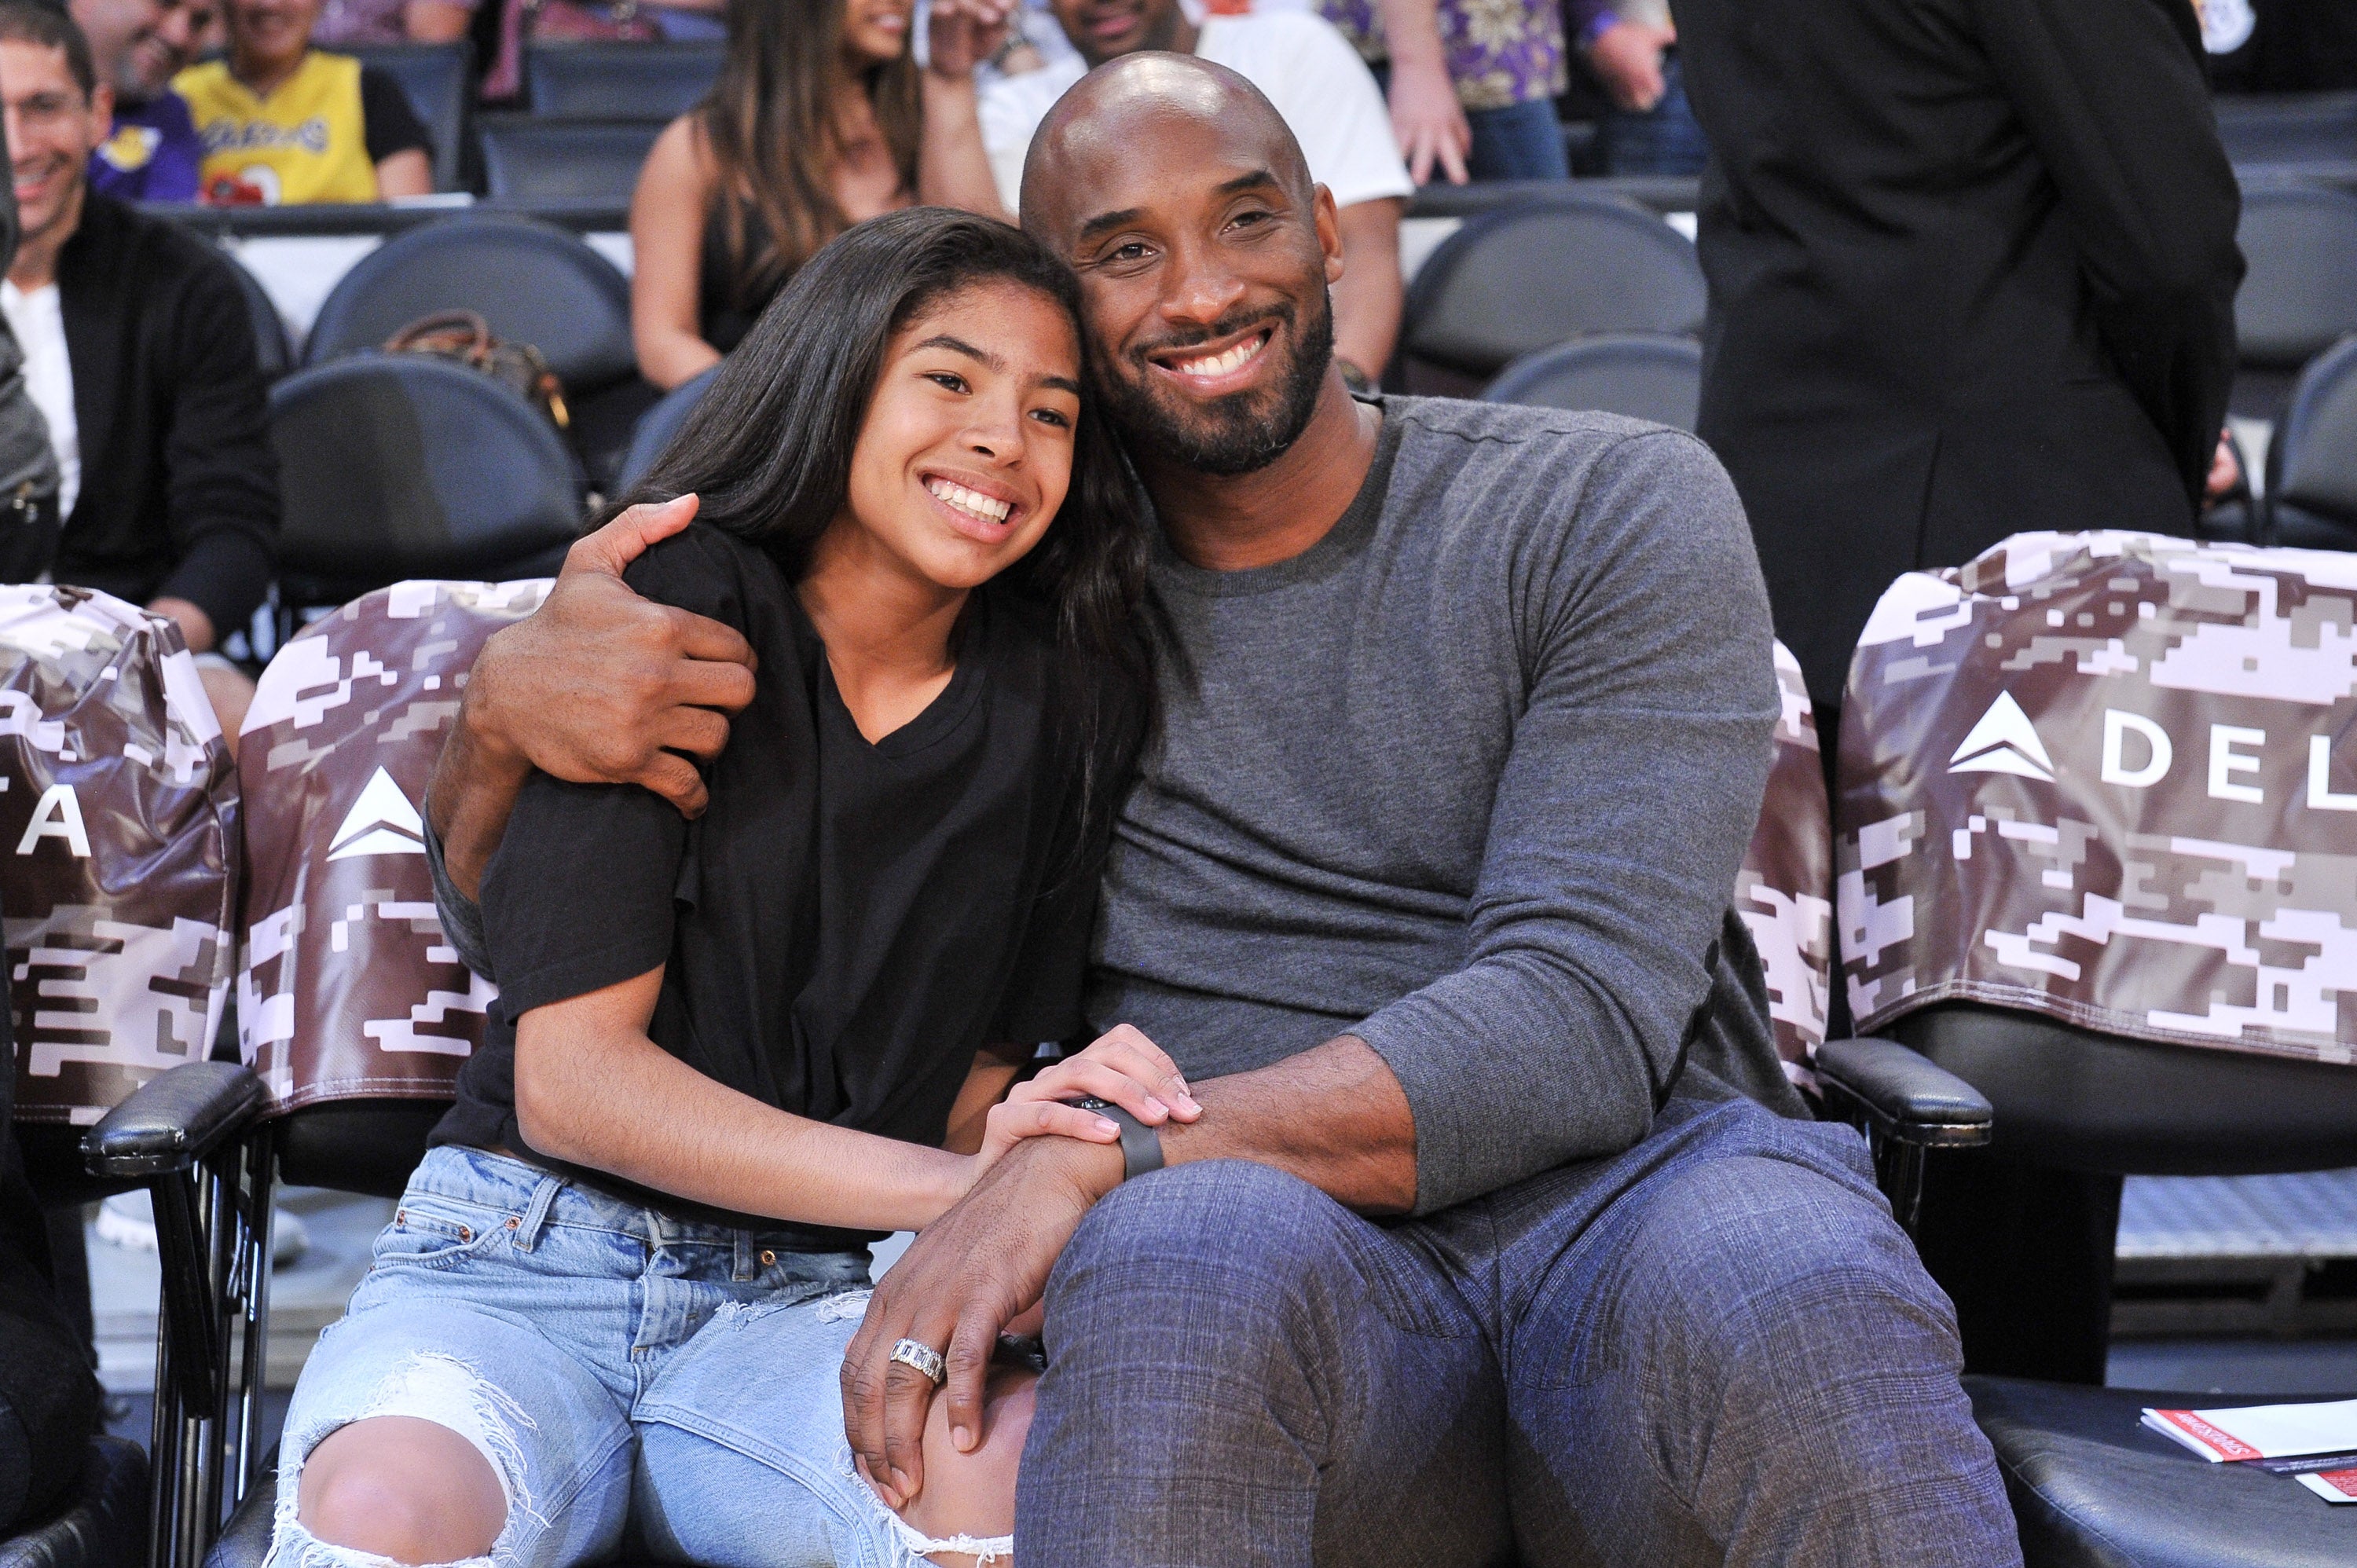 Kobe Bryant And 13-Year Daughter Gianna Memorialized In Private Funeral Ahead of Public Celebration